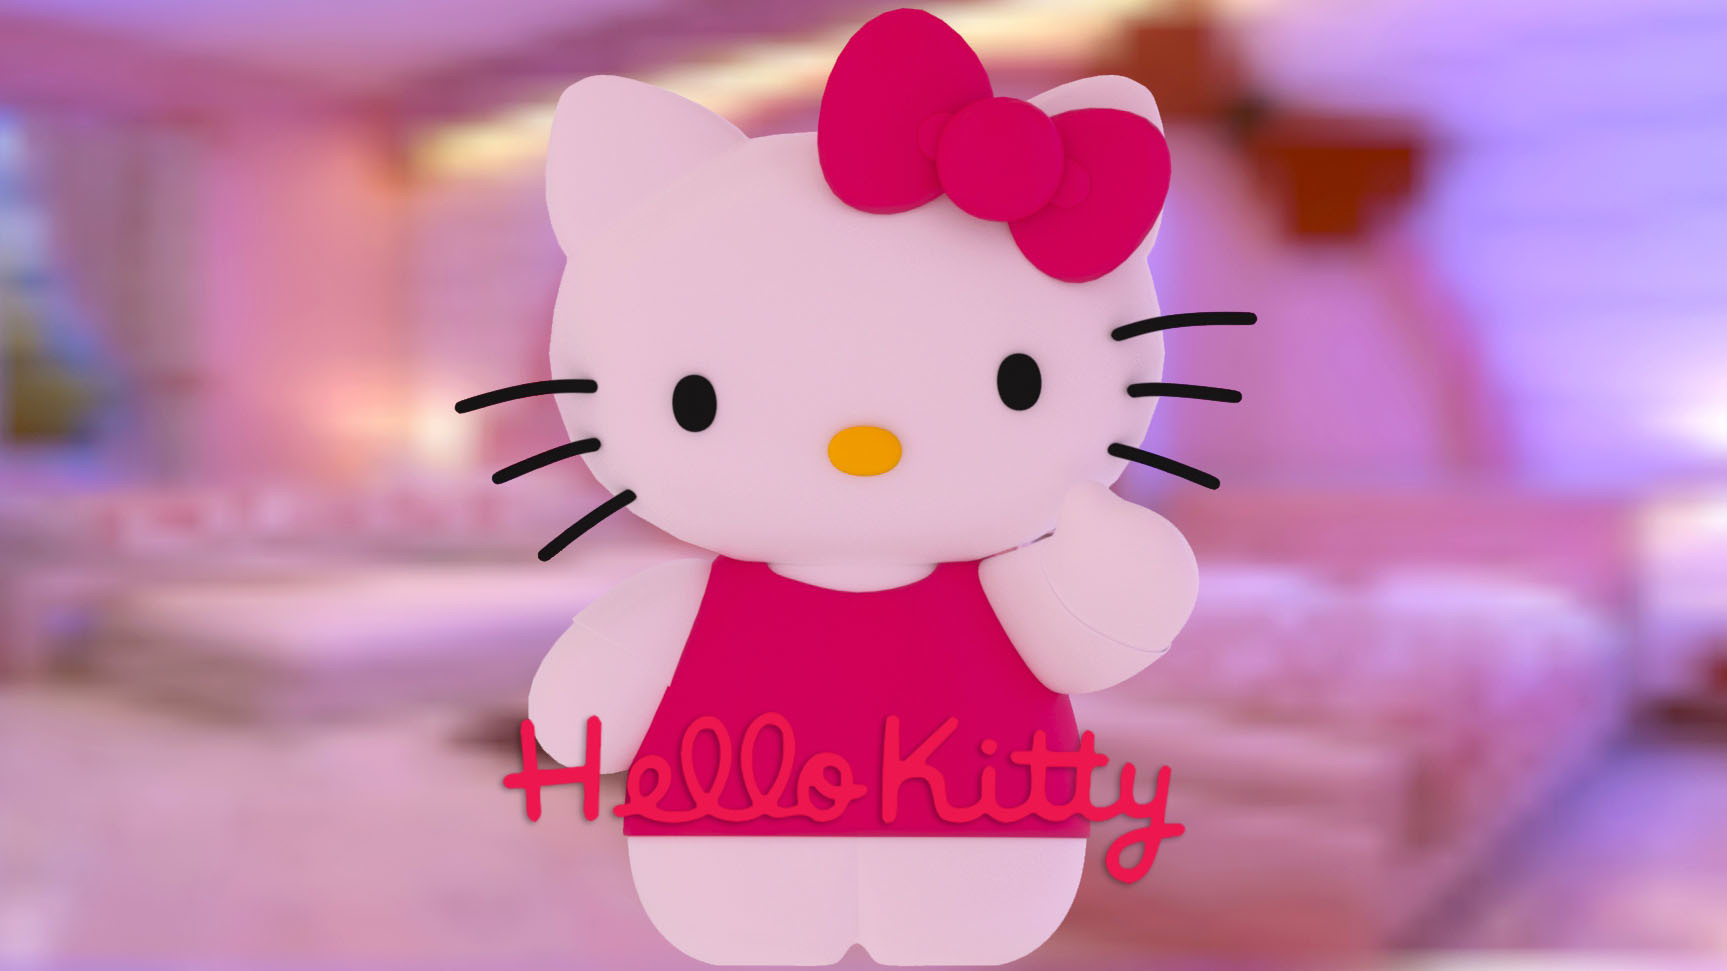 6,478 Hello Kitty Images, Stock Photos, 3D objects, & Vectors